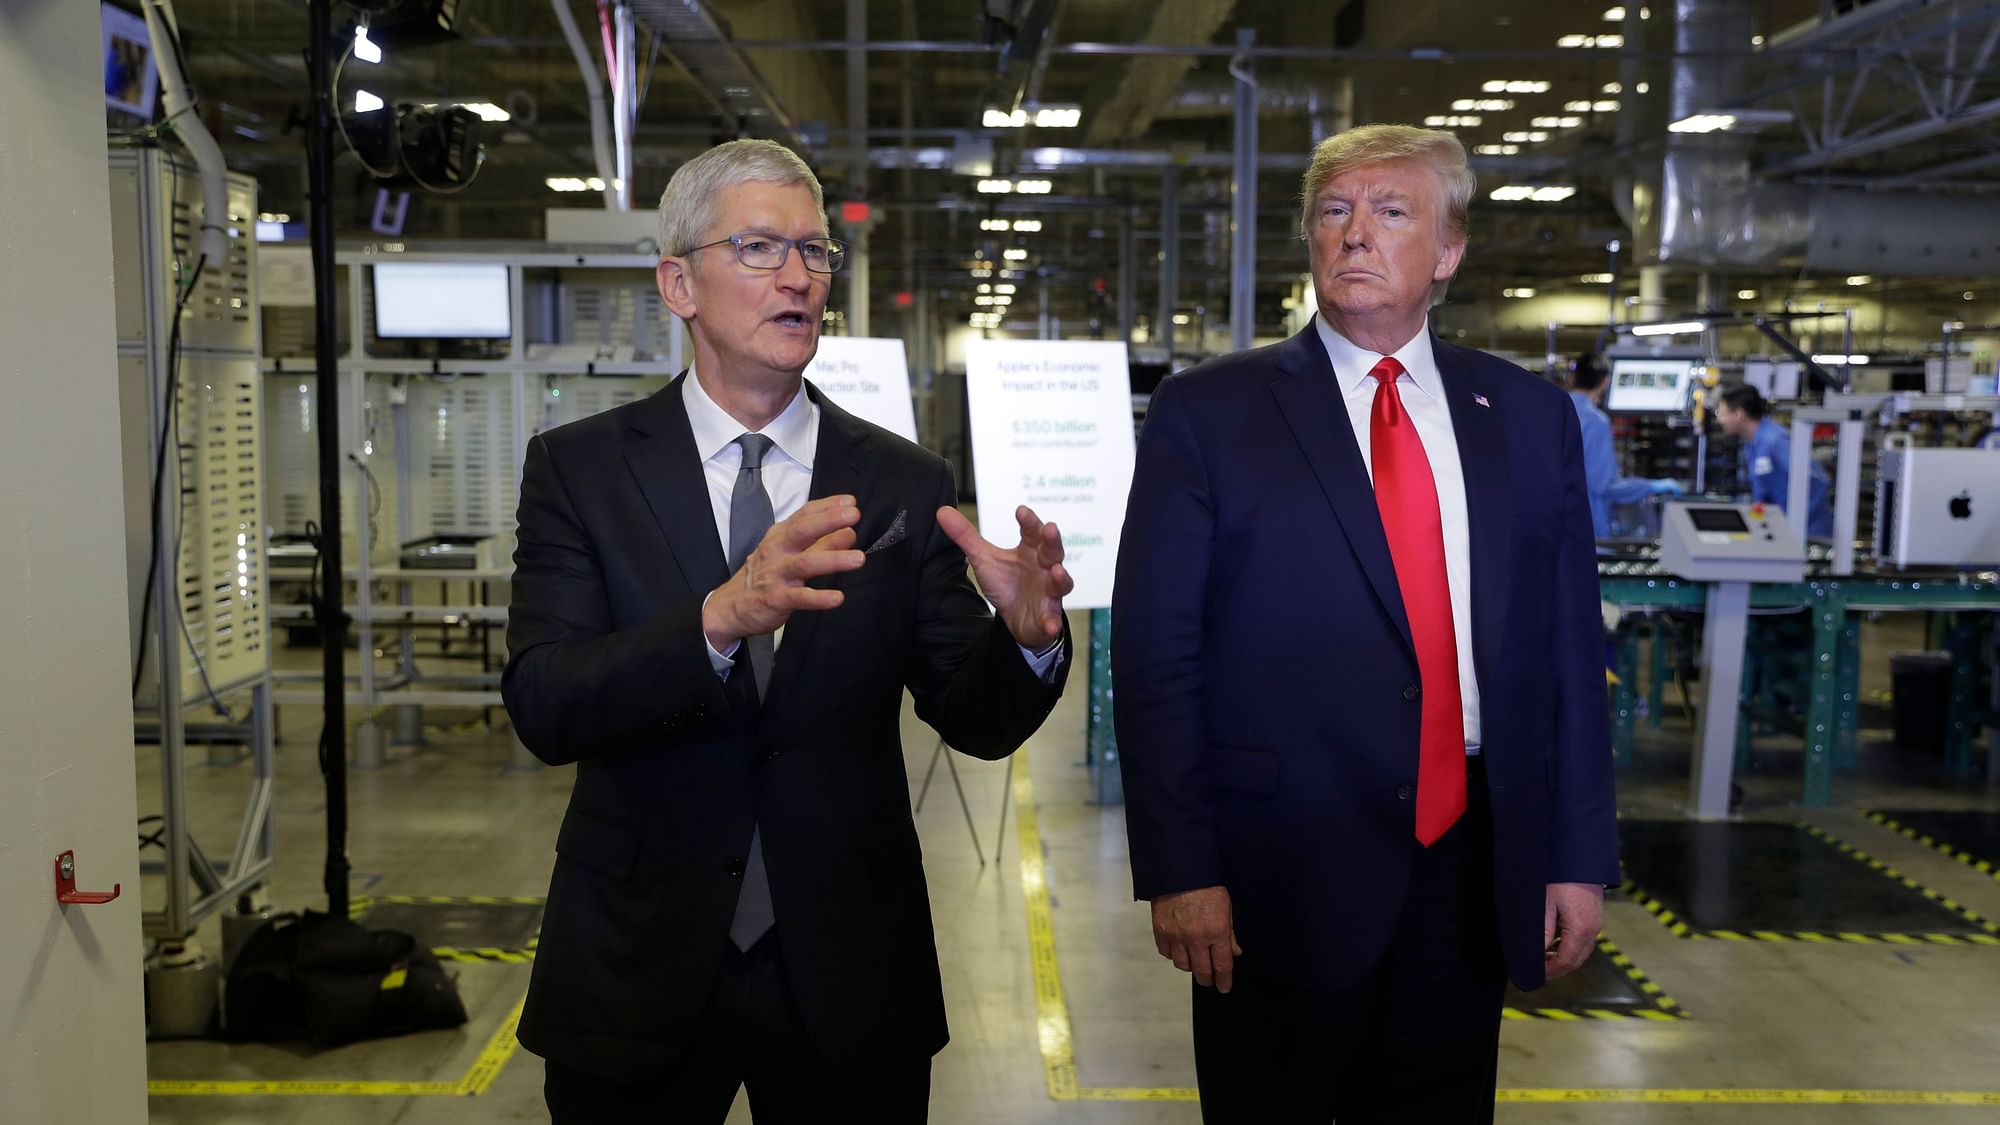 Apple CEO Tim Cook and President Donald Trump speak during a tour of an Apple manufacturing plant in Austin.